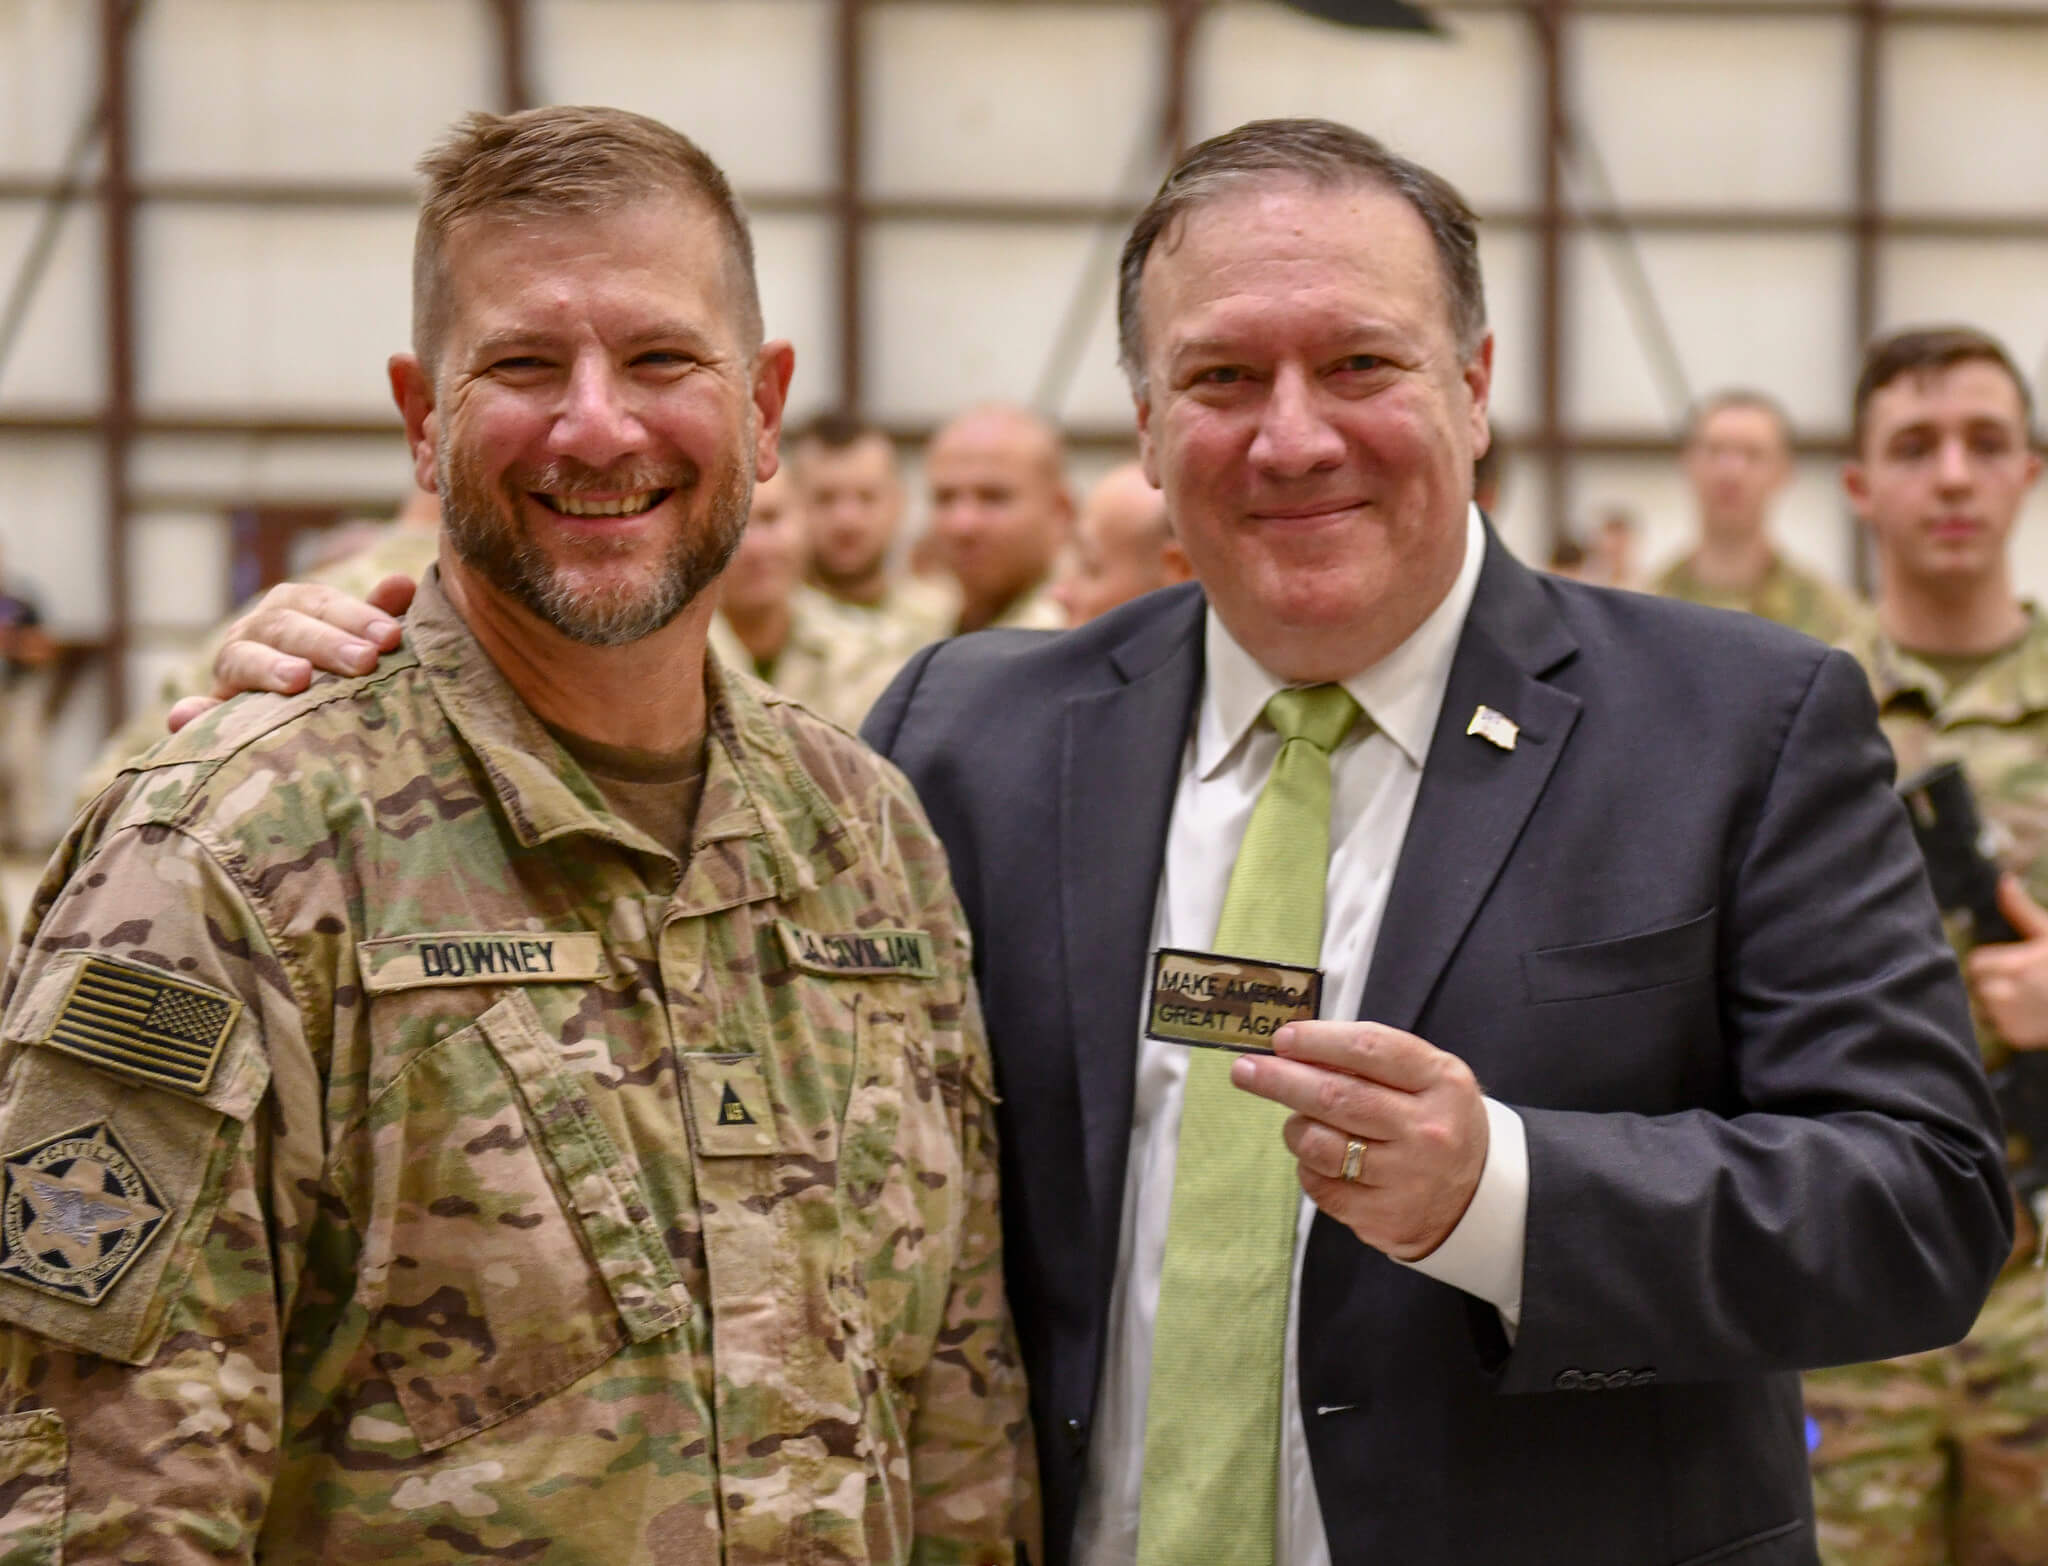 U.S. Secretary of State Michael R. Pompeo visits troops in Kabul, Afghanistan on July 9, 2018. (State Department photo/ Public Domain)